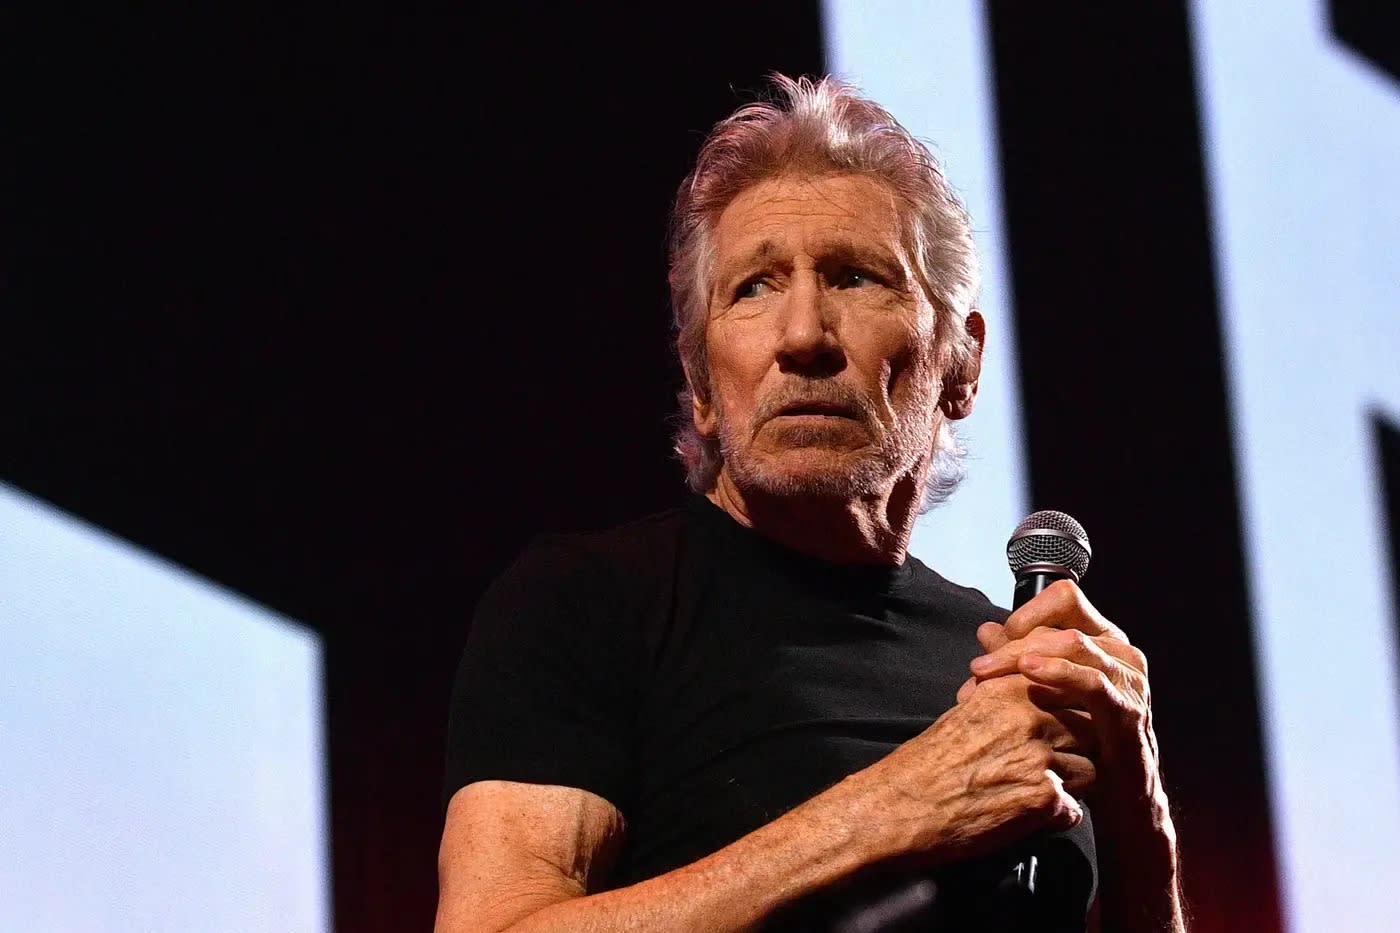 ''Not impressed with Israeli massacres. Roger Waters'' (credit: Jim Dyson / GettyImages)